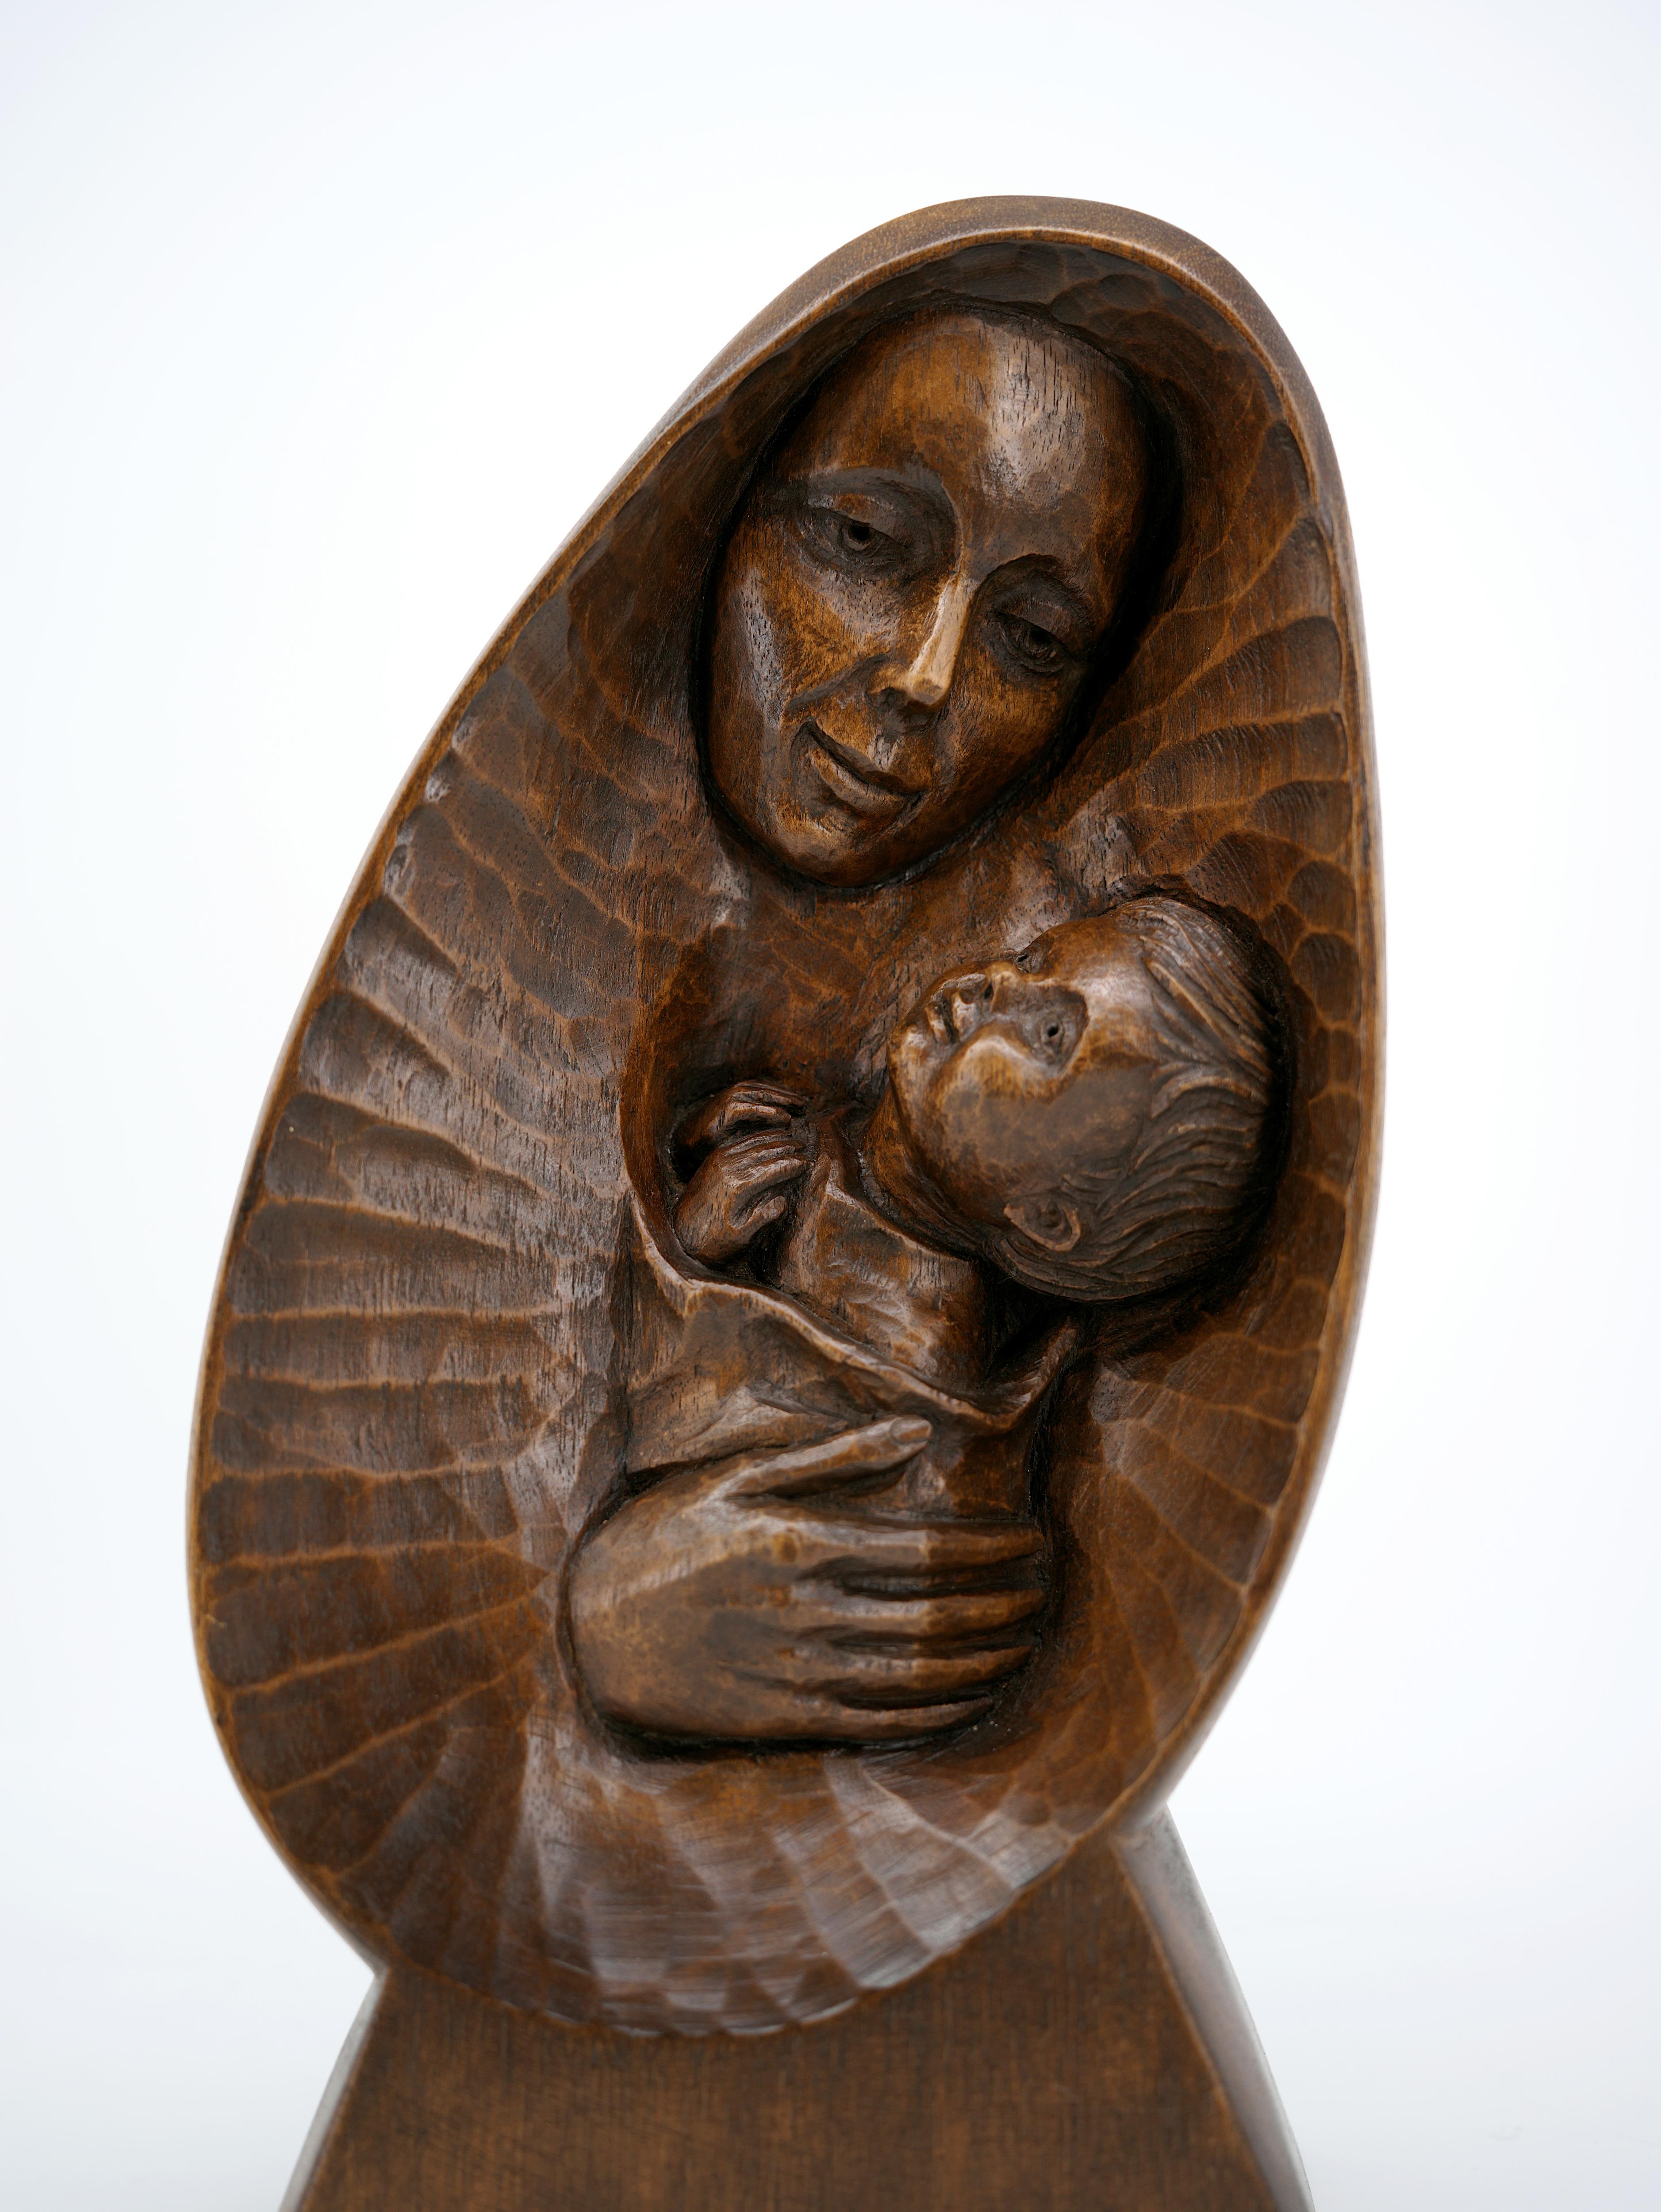 French Art Deco mother & child statue by René Mercier, France, 1930s. Wood. Hand carved statue of mother & child. Height : 11.7